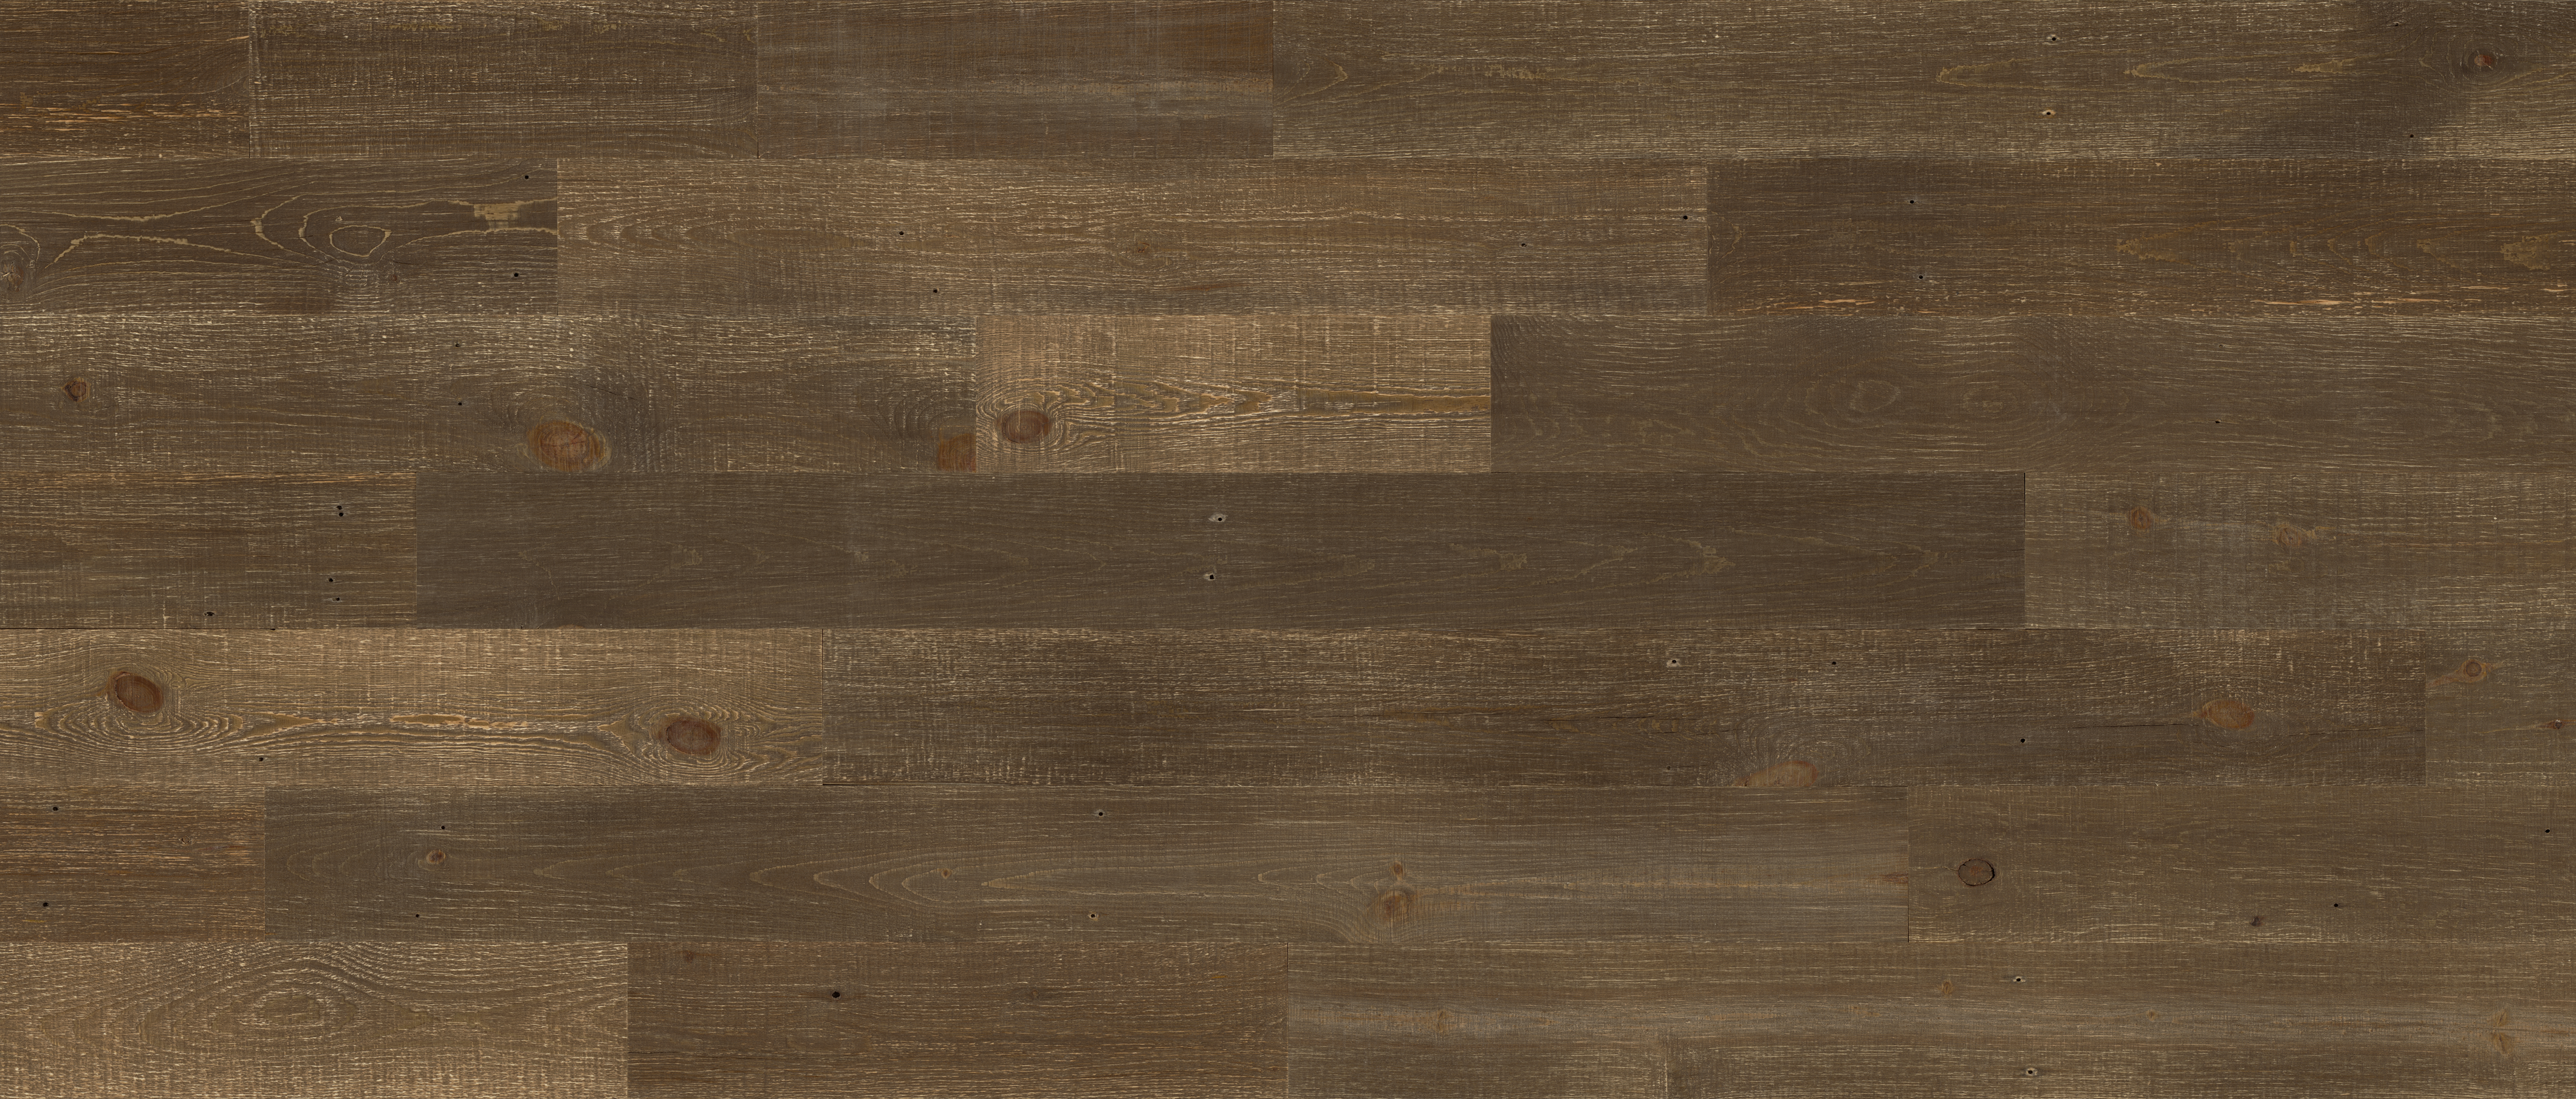 Stikwood Reclaimed Hazelnut material explorer | real reclaimed barnwood pine peel and stick wood wall and ceiling planks with rich brown, tan and warm colors.